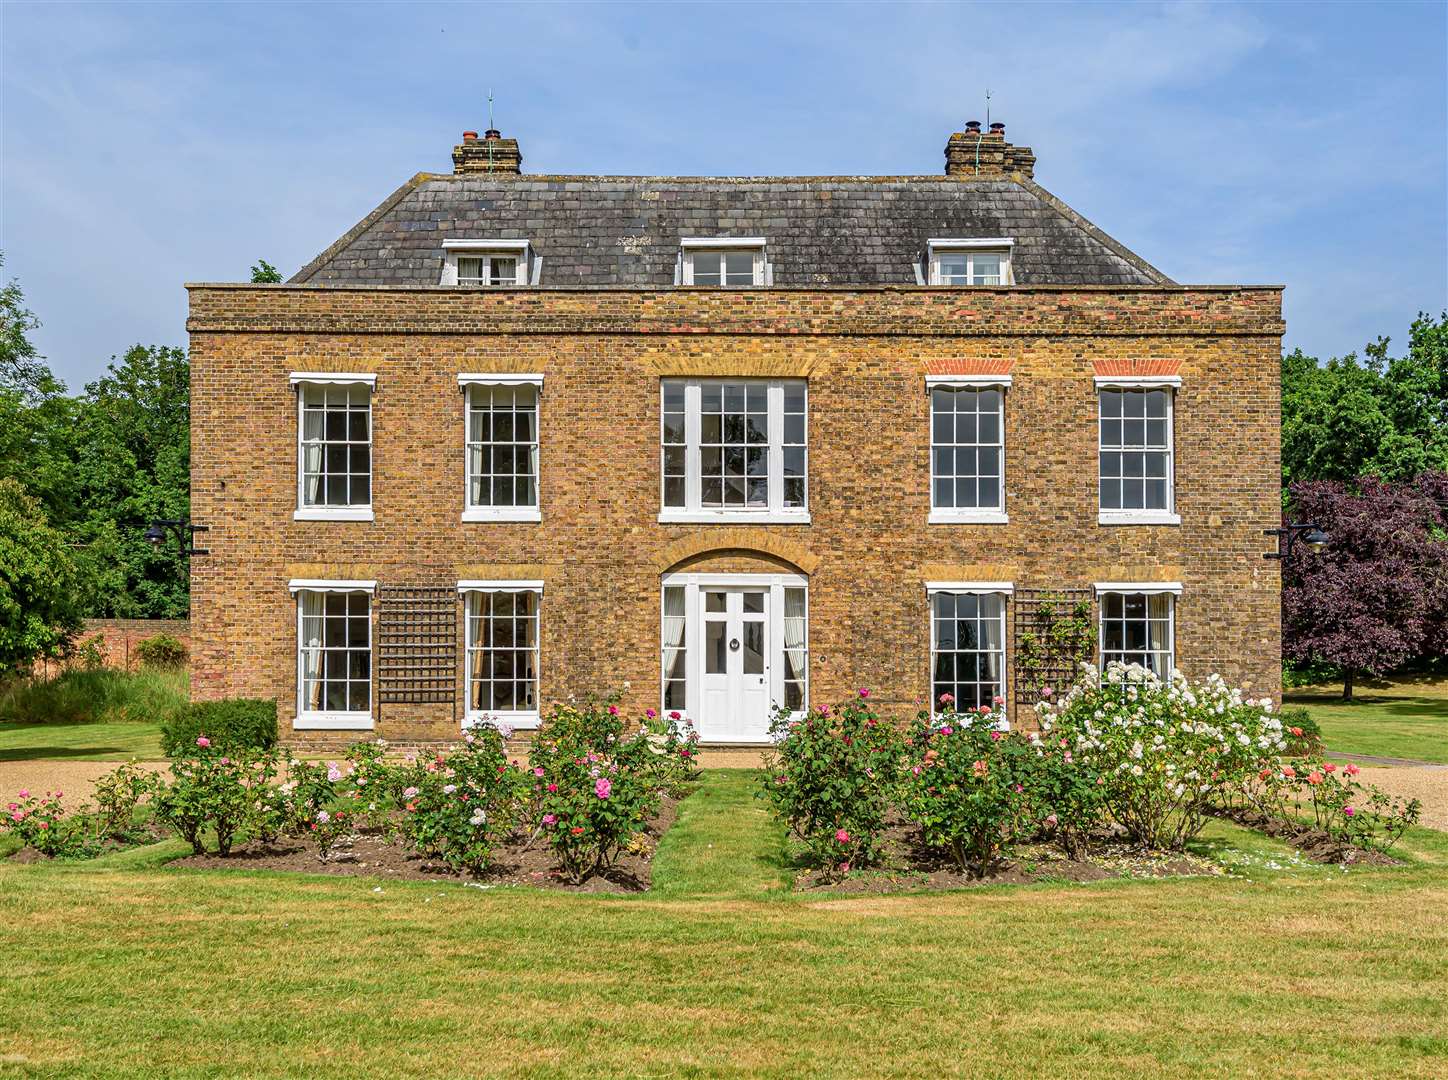 The stately mansion went up for sale for £2.25 million in 2022. Picture: Niche photography